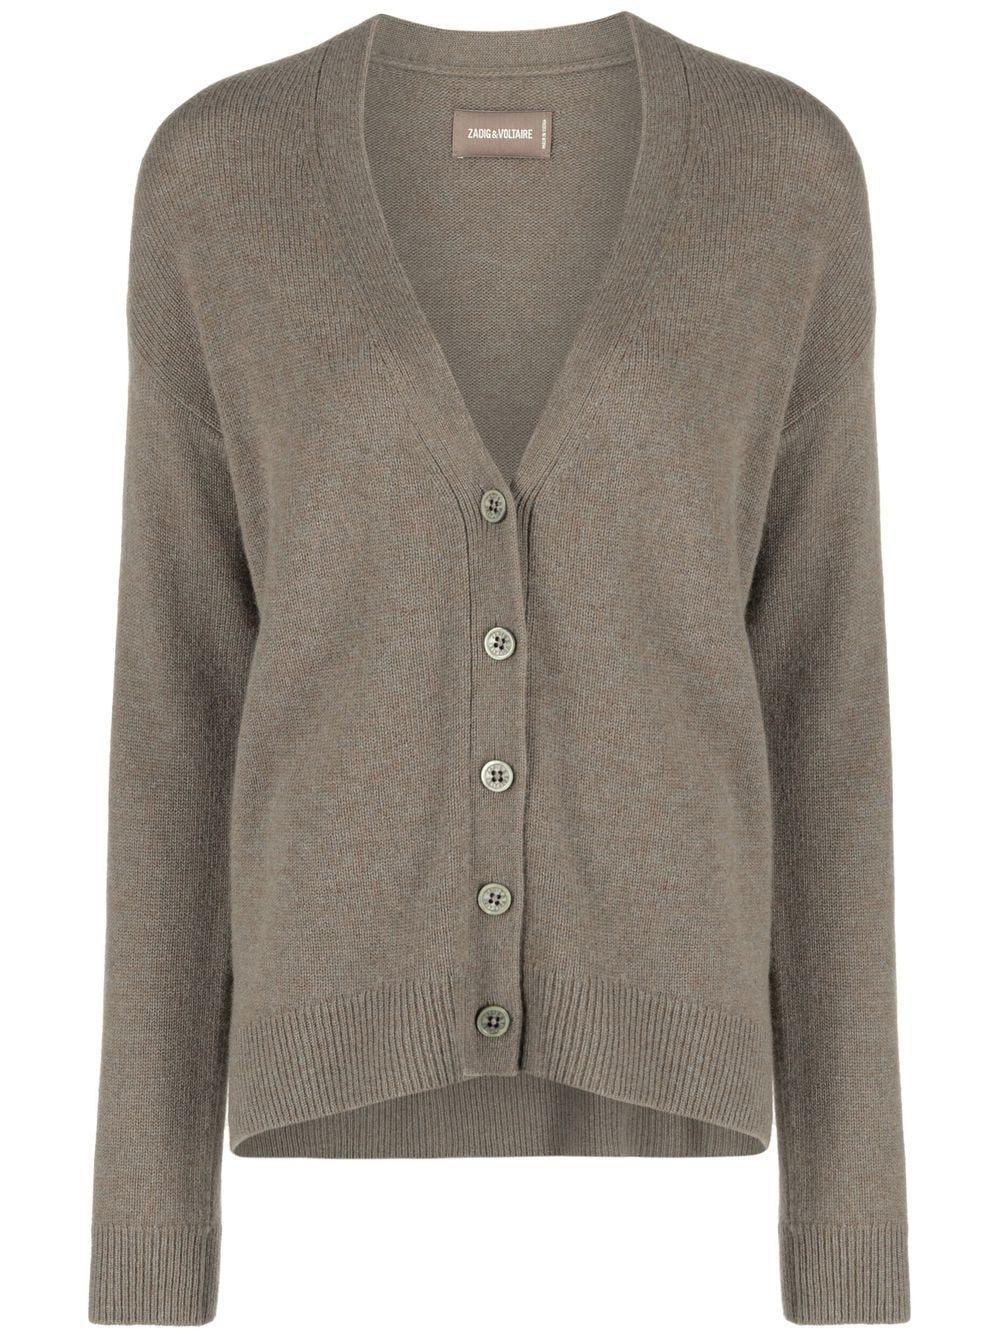 Zadig & Voltaire Mirka Embellished Cashmere Cardigan in Gray | Lyst